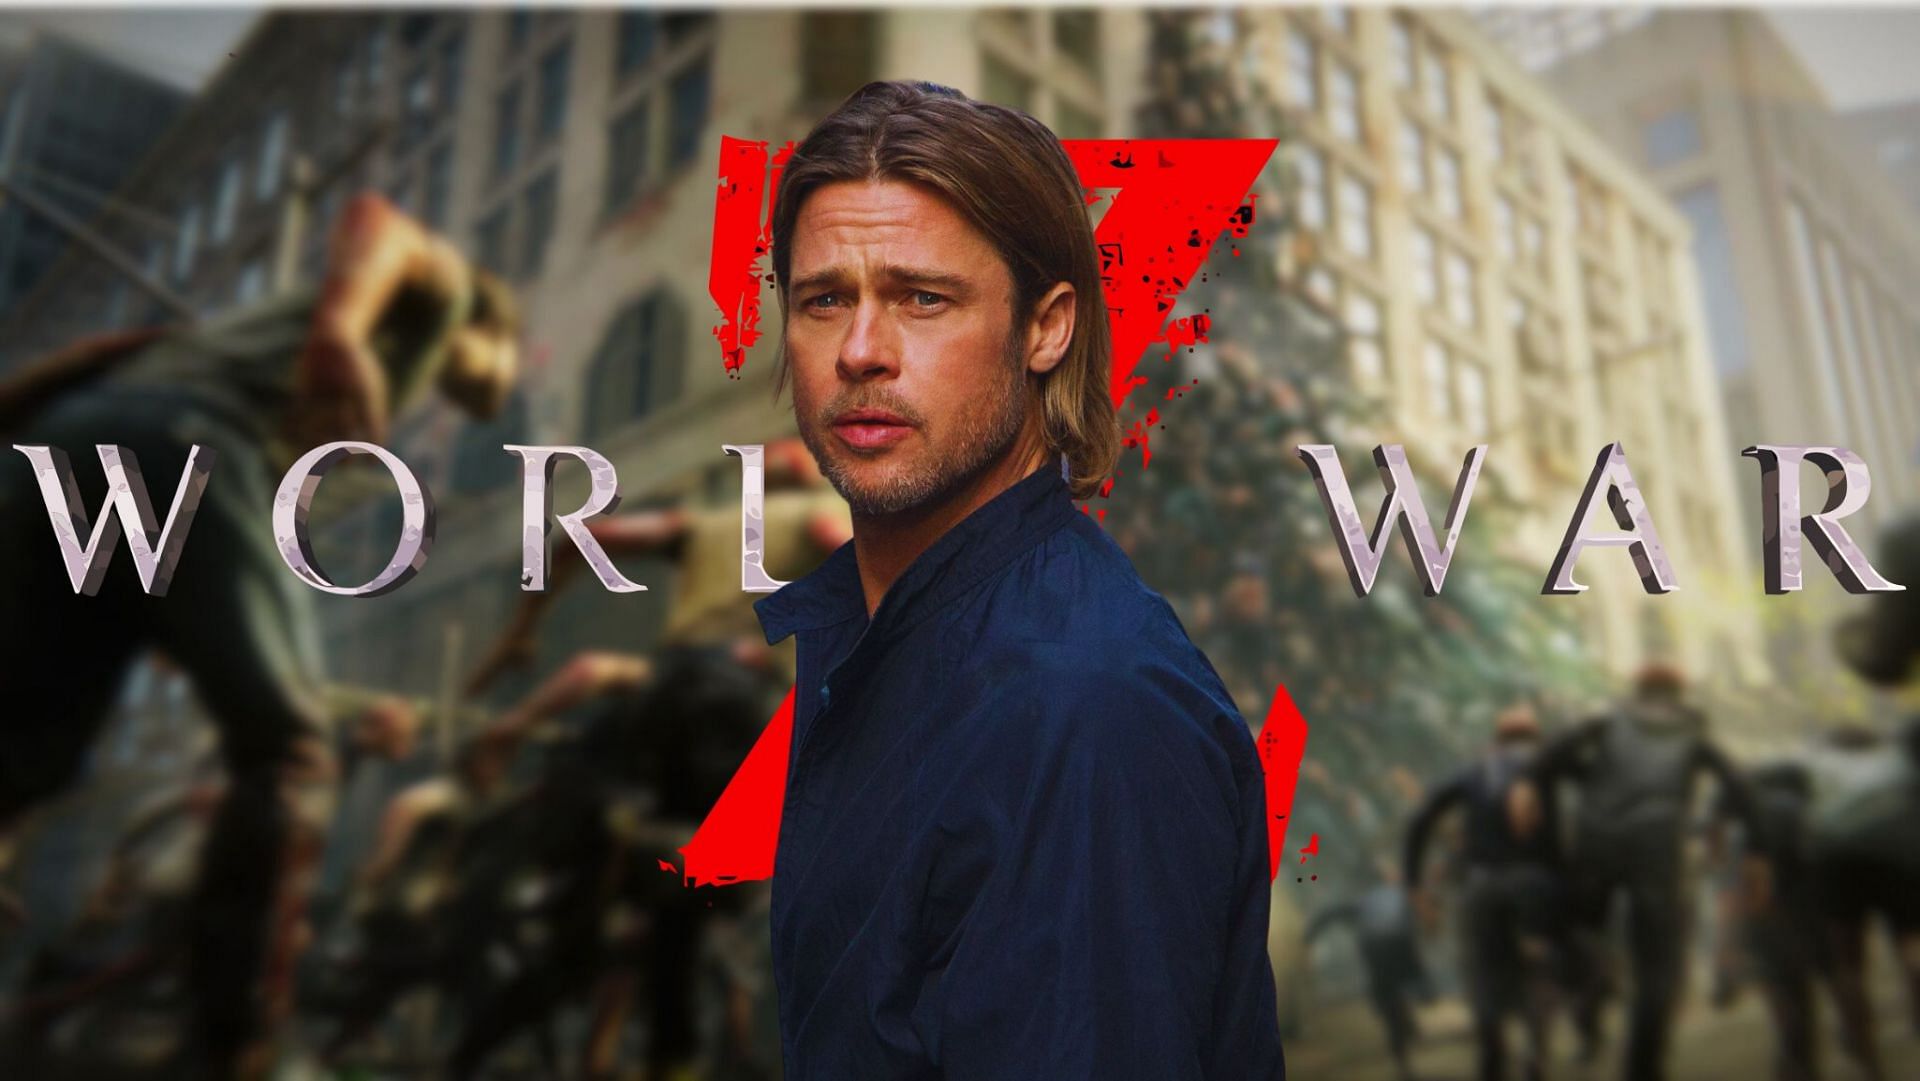 Brad Pitt amid a zombie horde: Is World War Z 2 lurking in the shadows or just a figment of imagination? (Image via Sportskeeda)